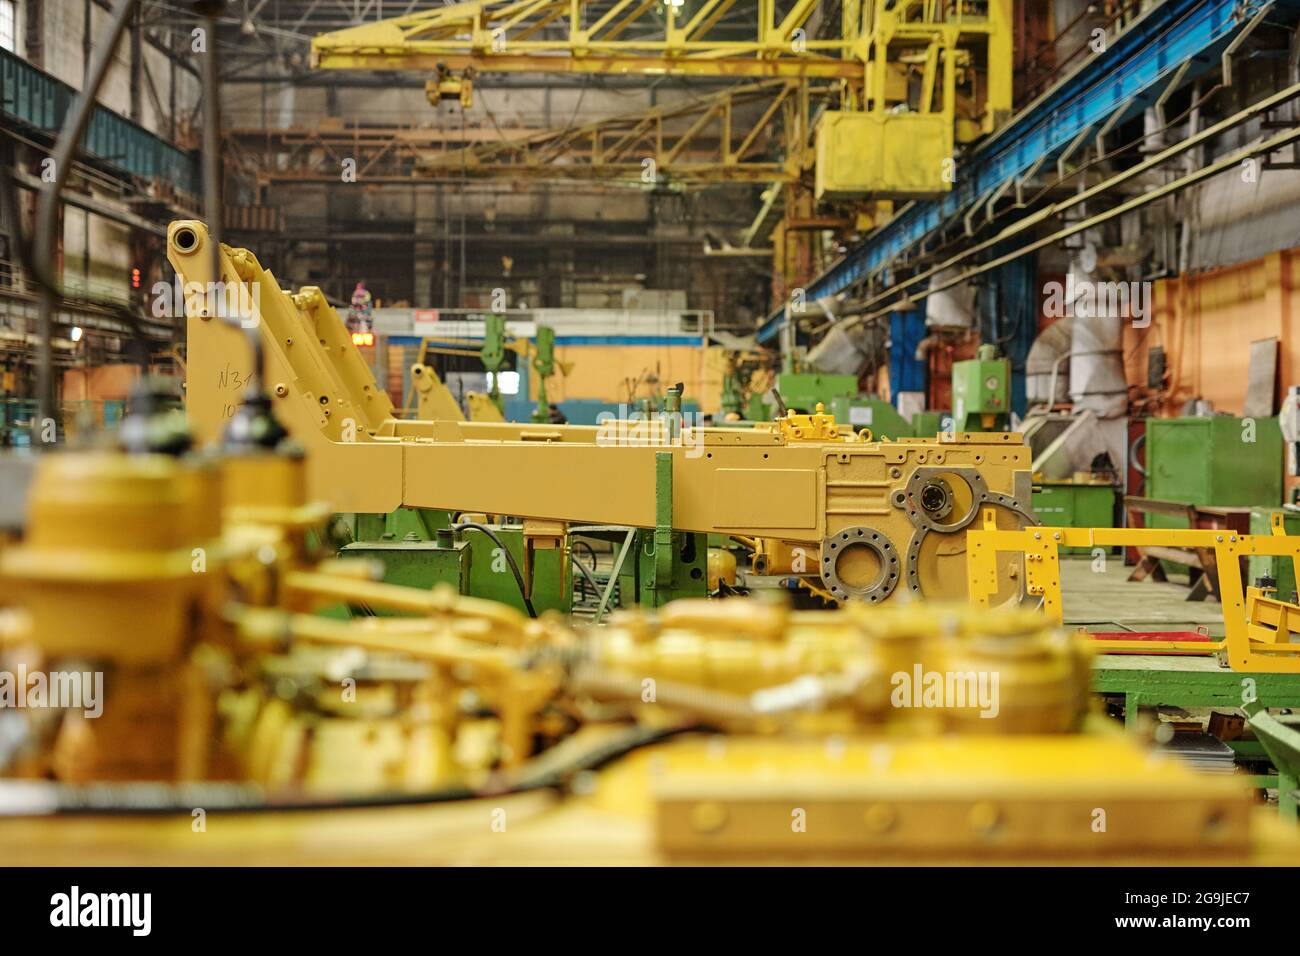 Close-up of detail of machine equipment in machinery factory Stock Photo